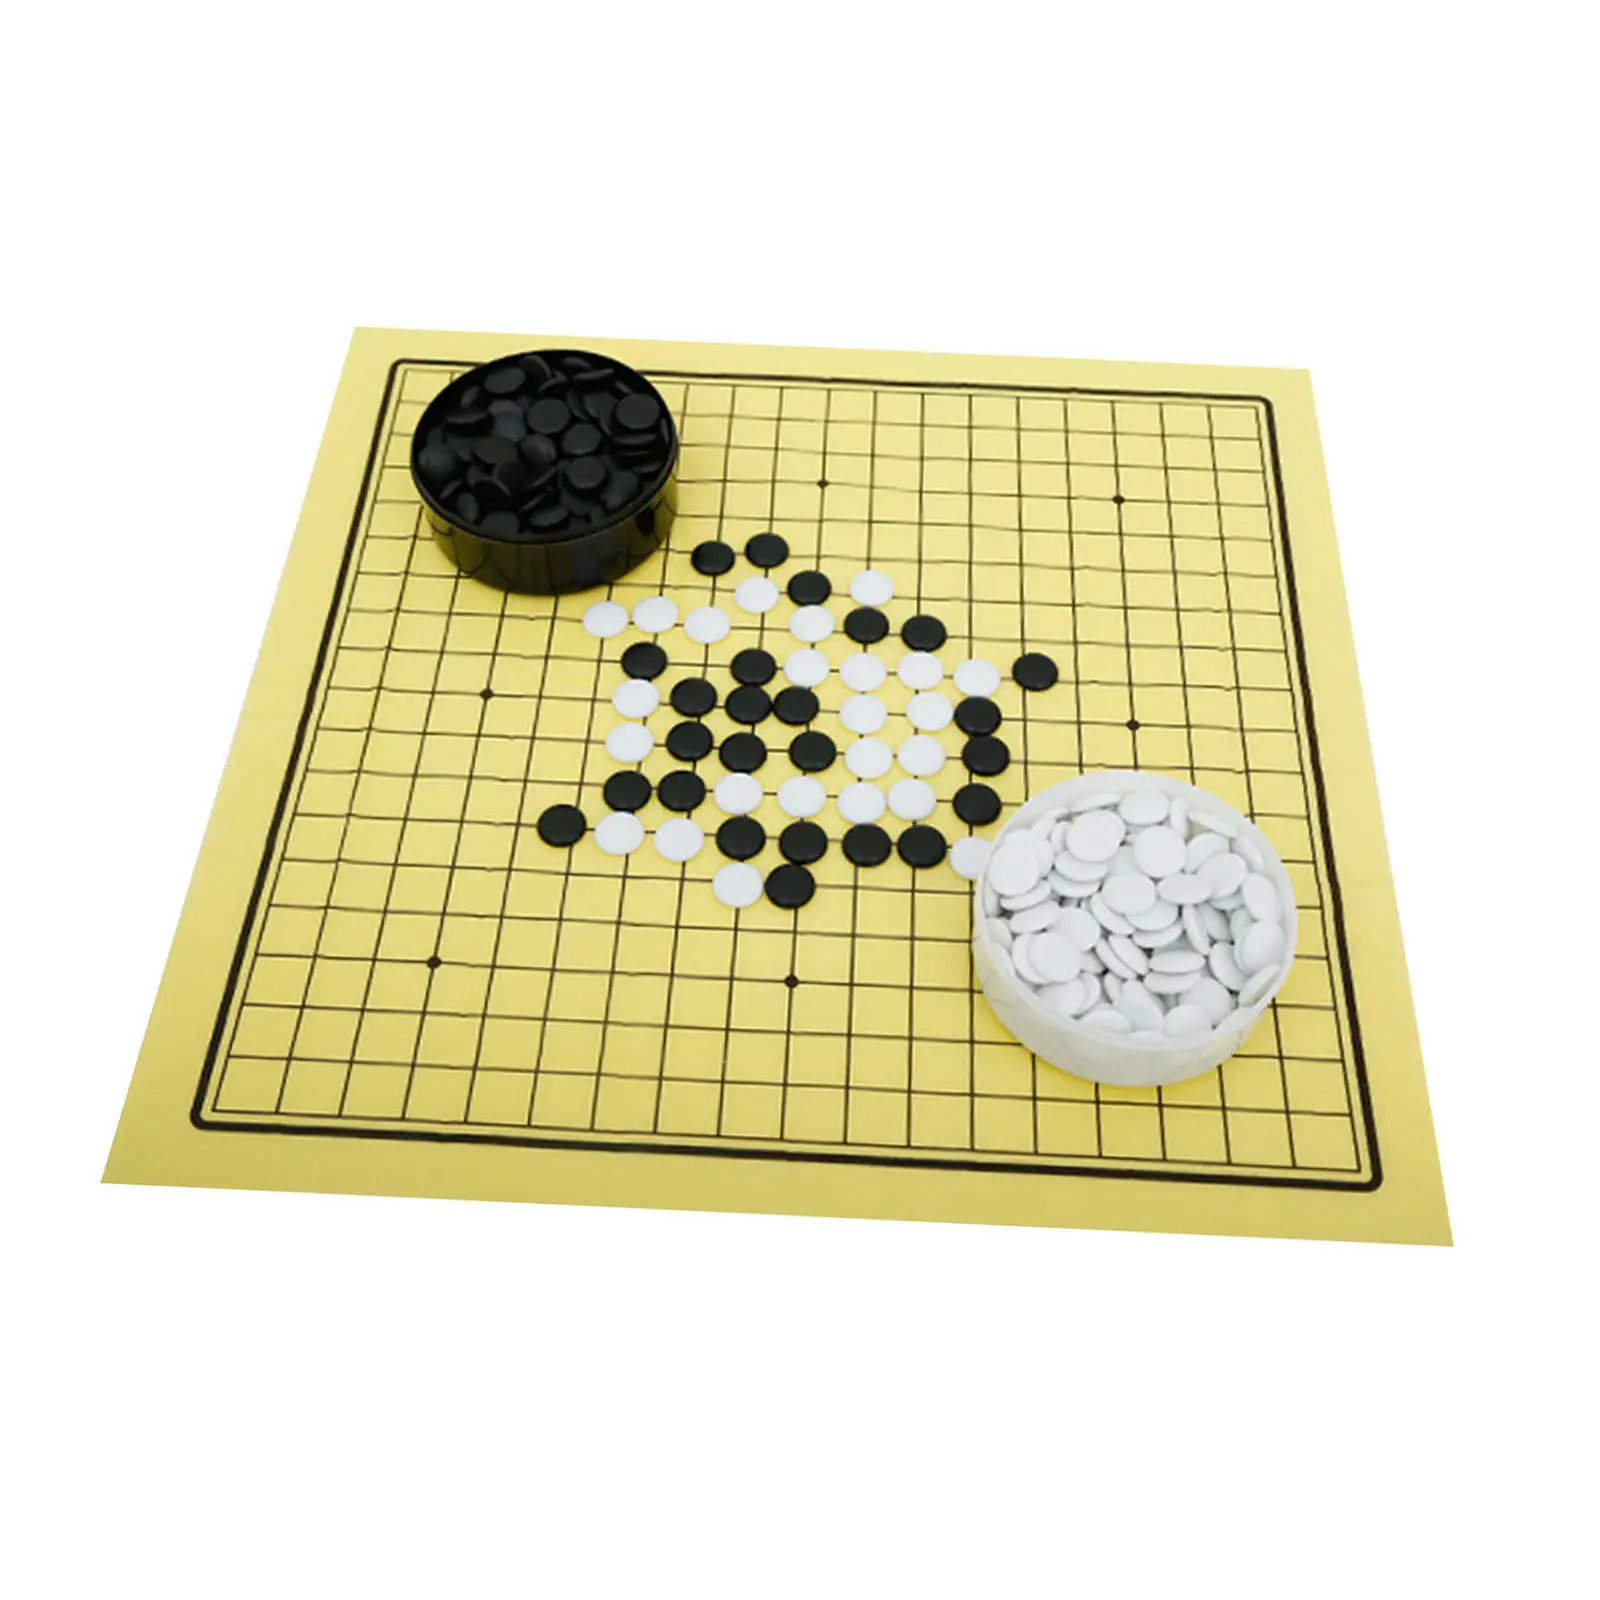 Folding Go Game Set Baduk/Weiqi 2 Player with Box Board Game Classic Strategy Games Go Set for Picnic Travel Beginner Adults